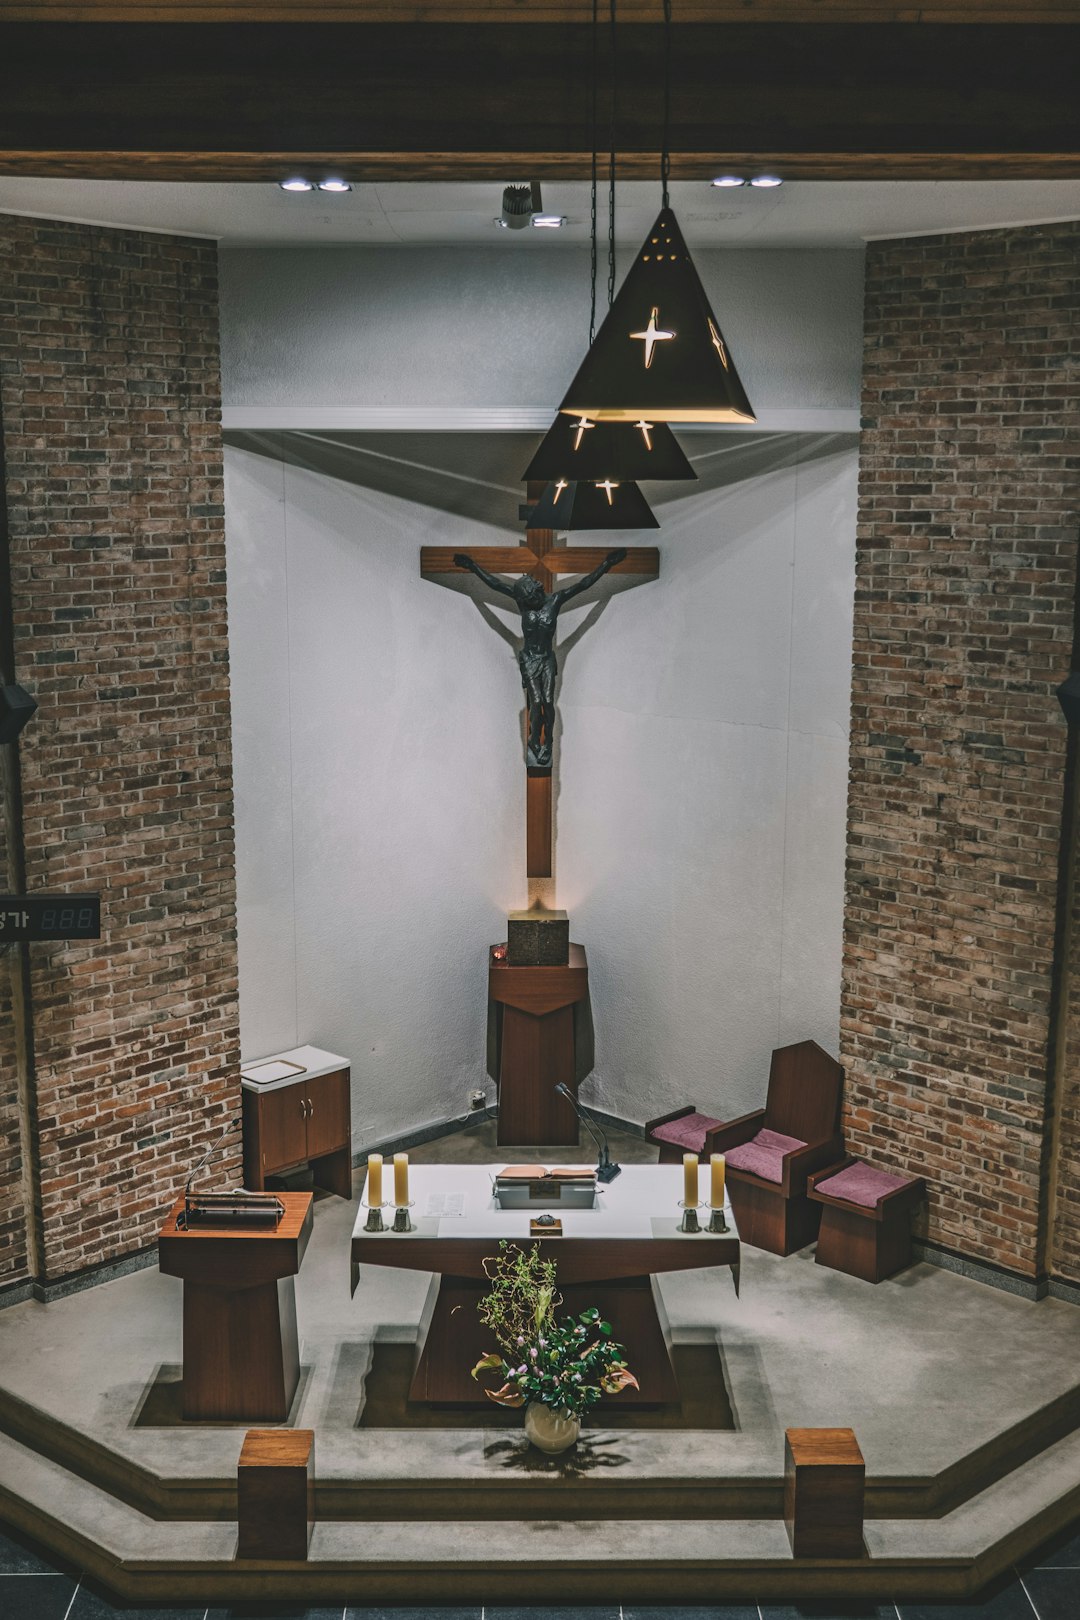 flower in front of altar and Crucifix